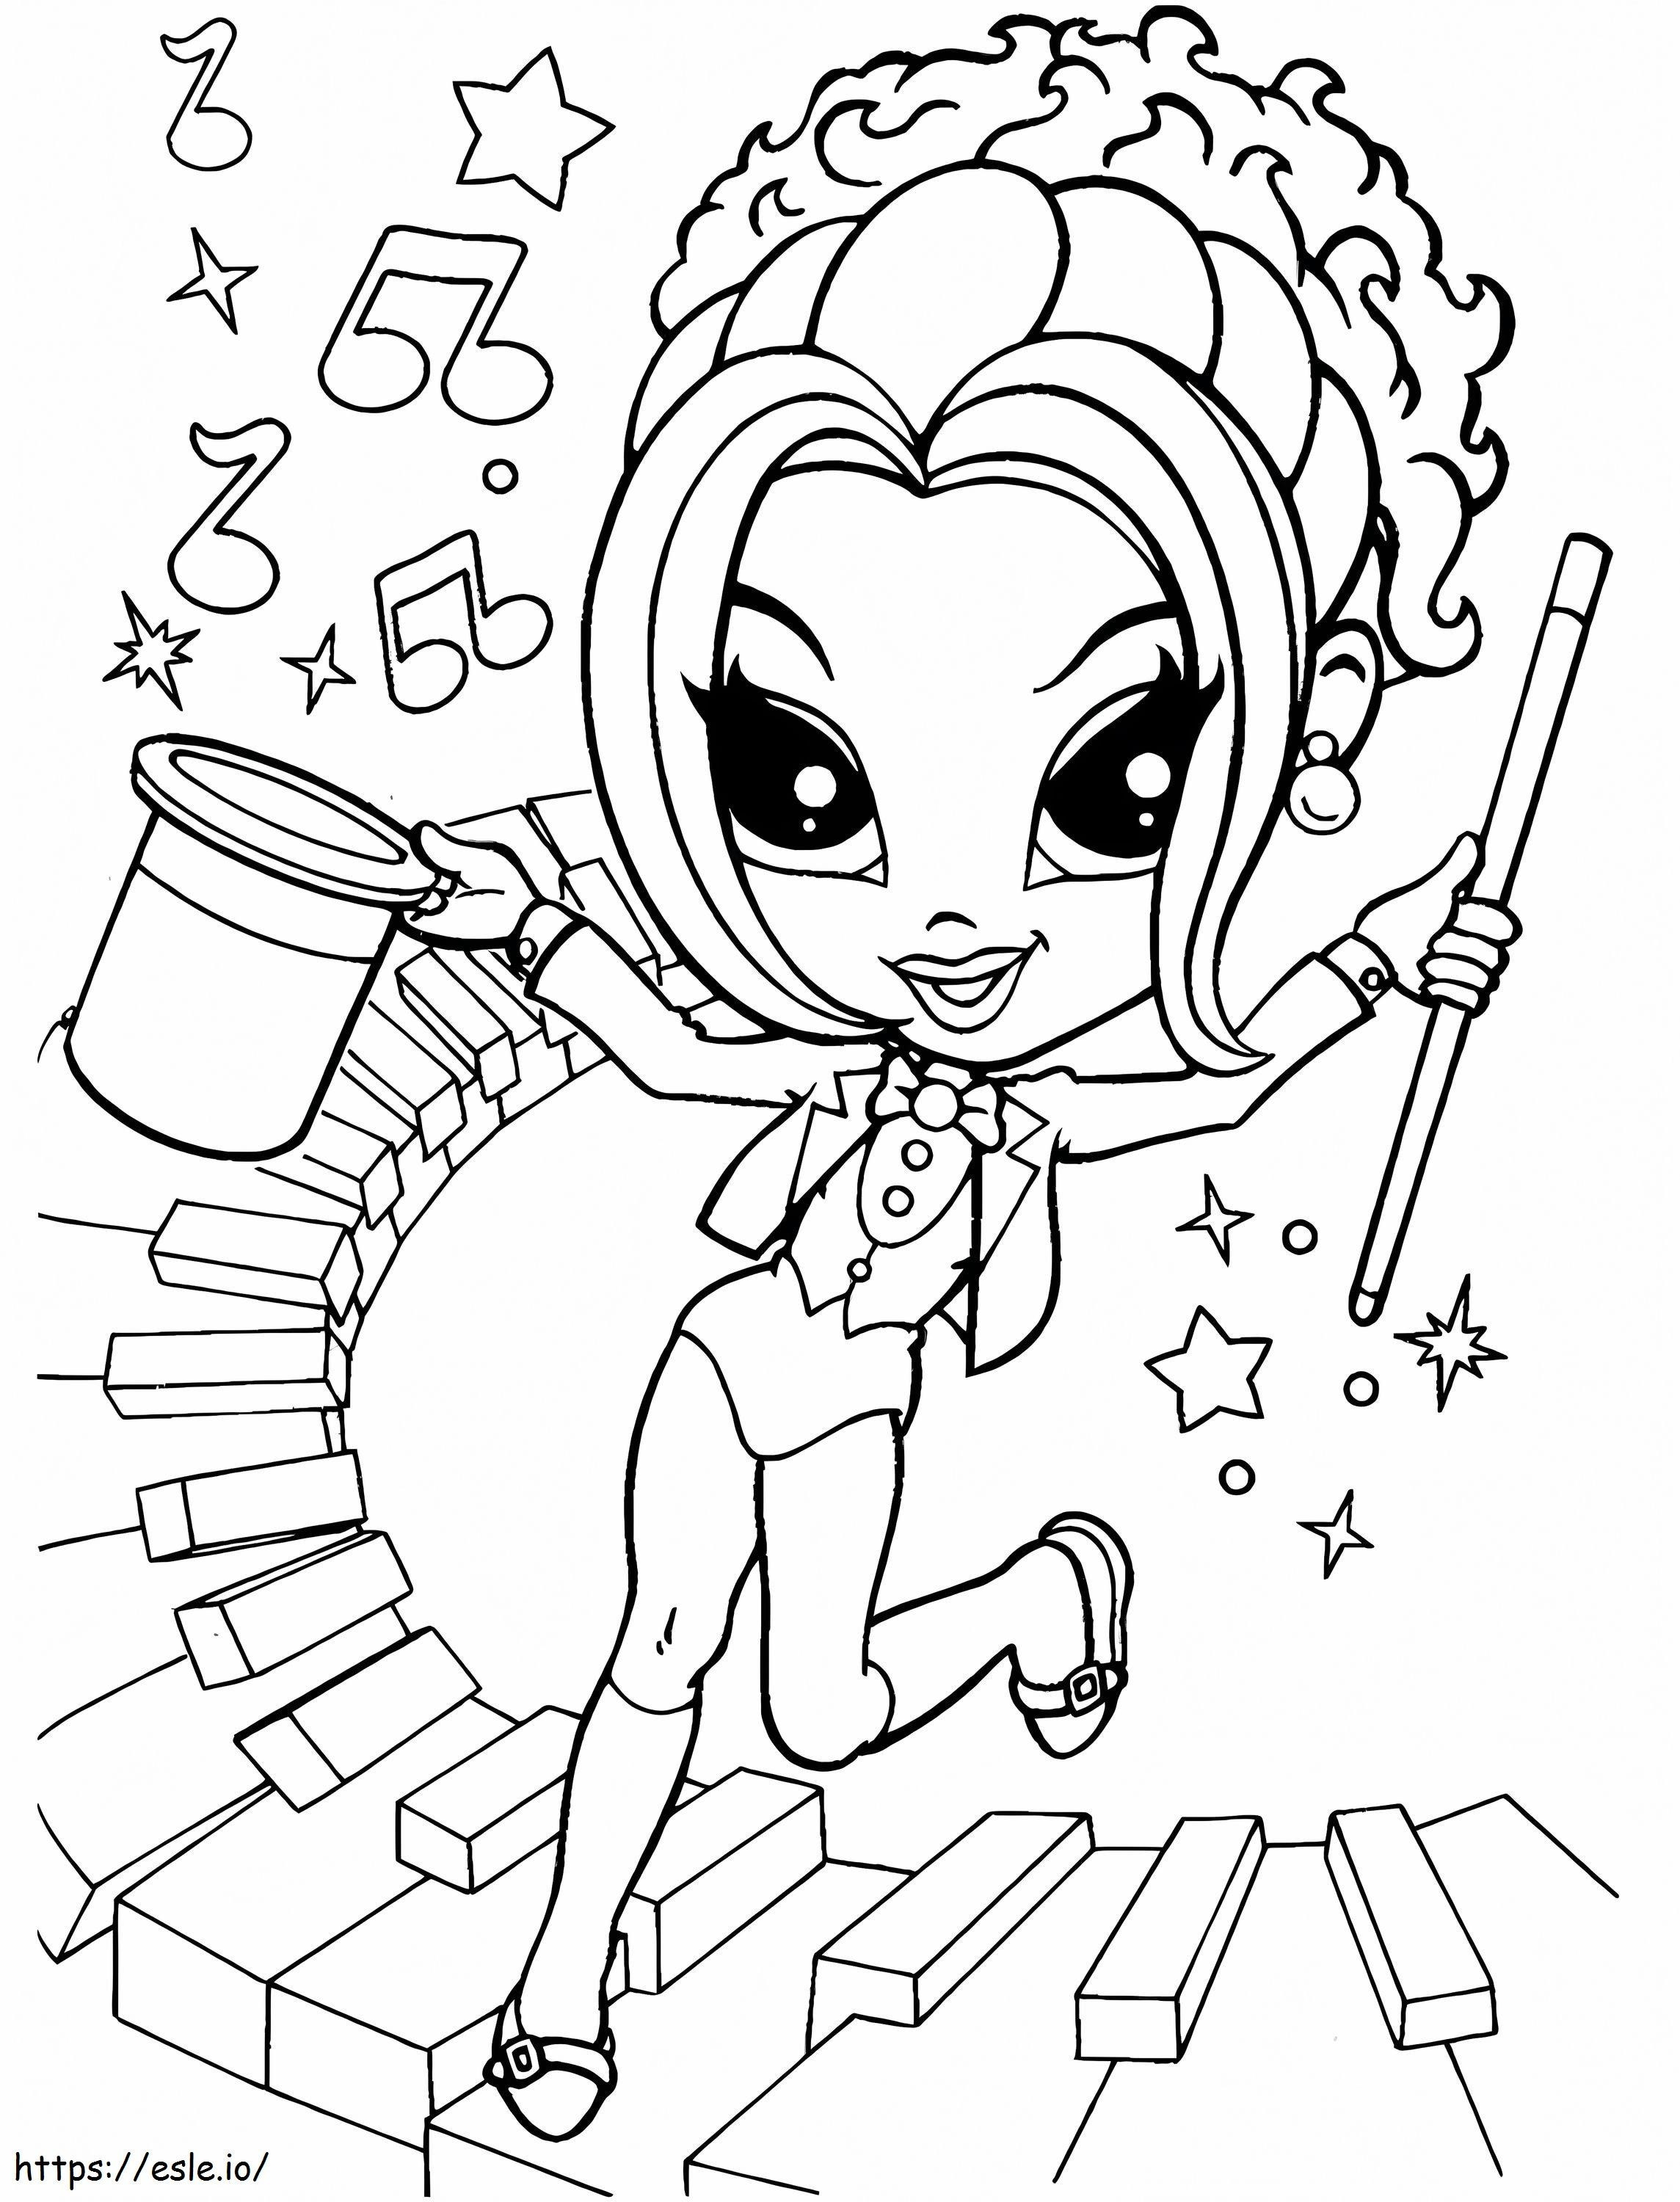 1566459235 Magician Lisa Frank A4 coloring page